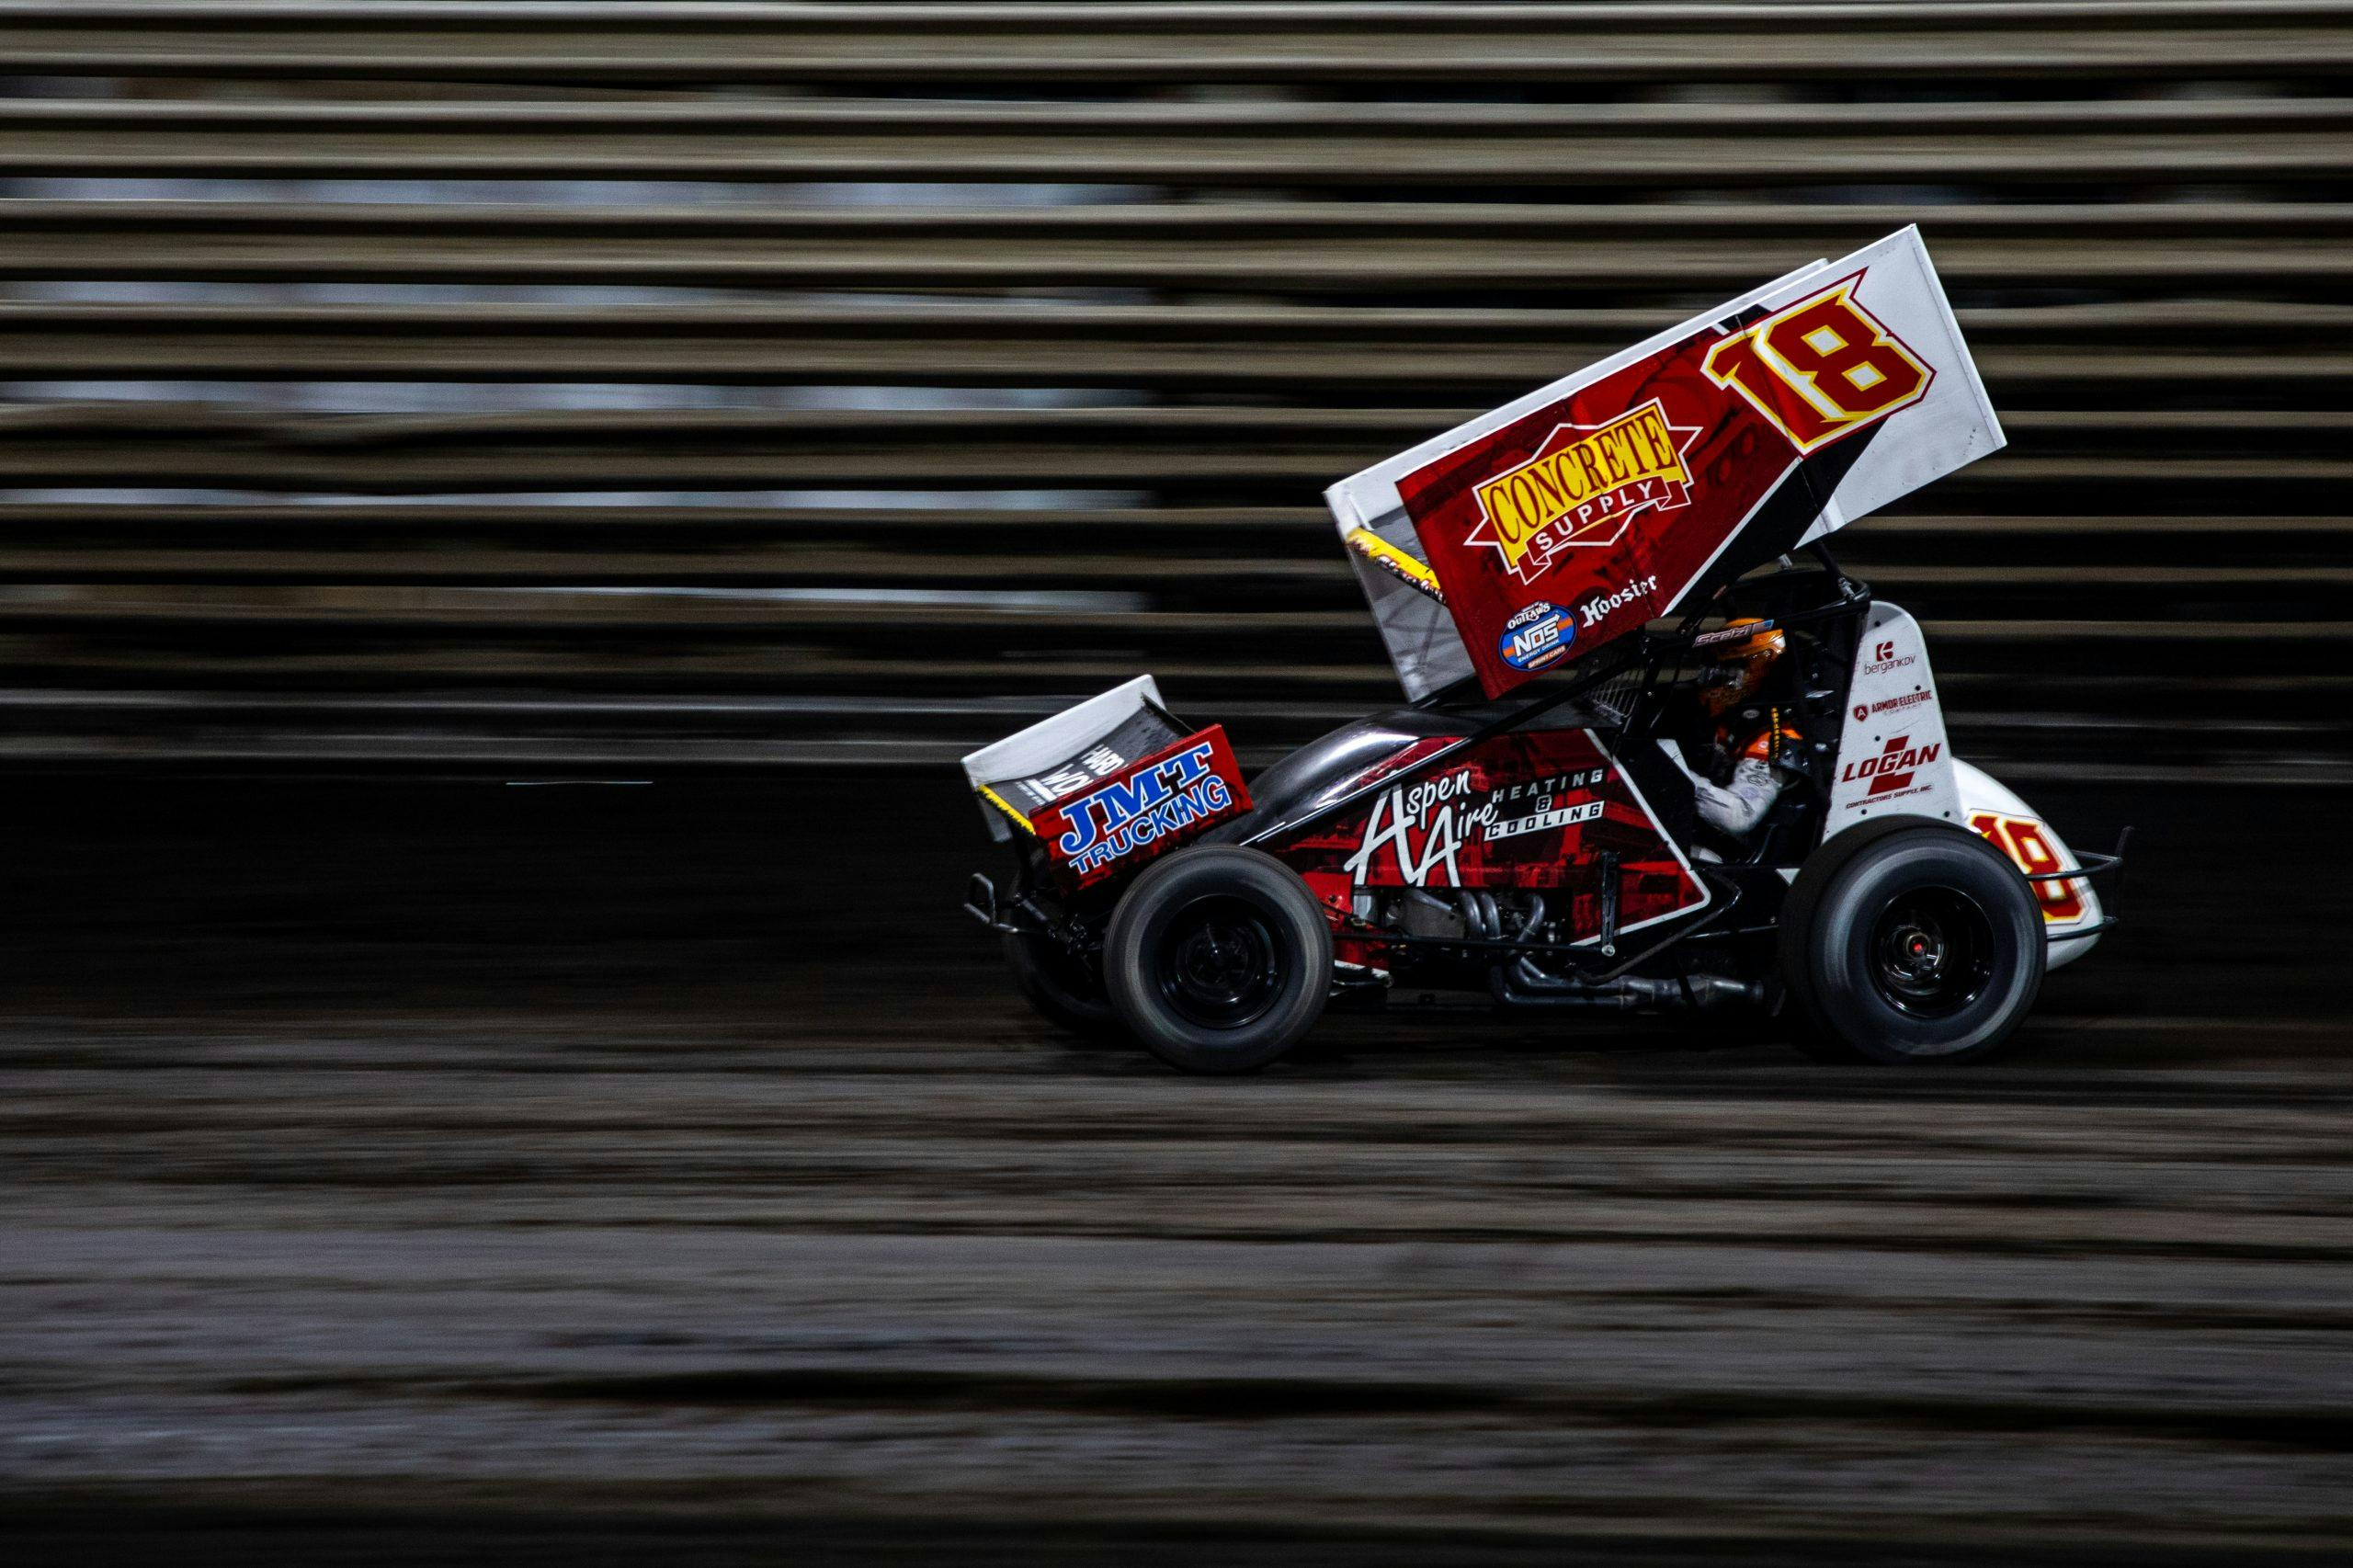 Knoxville Raceway dirt track racing action 18